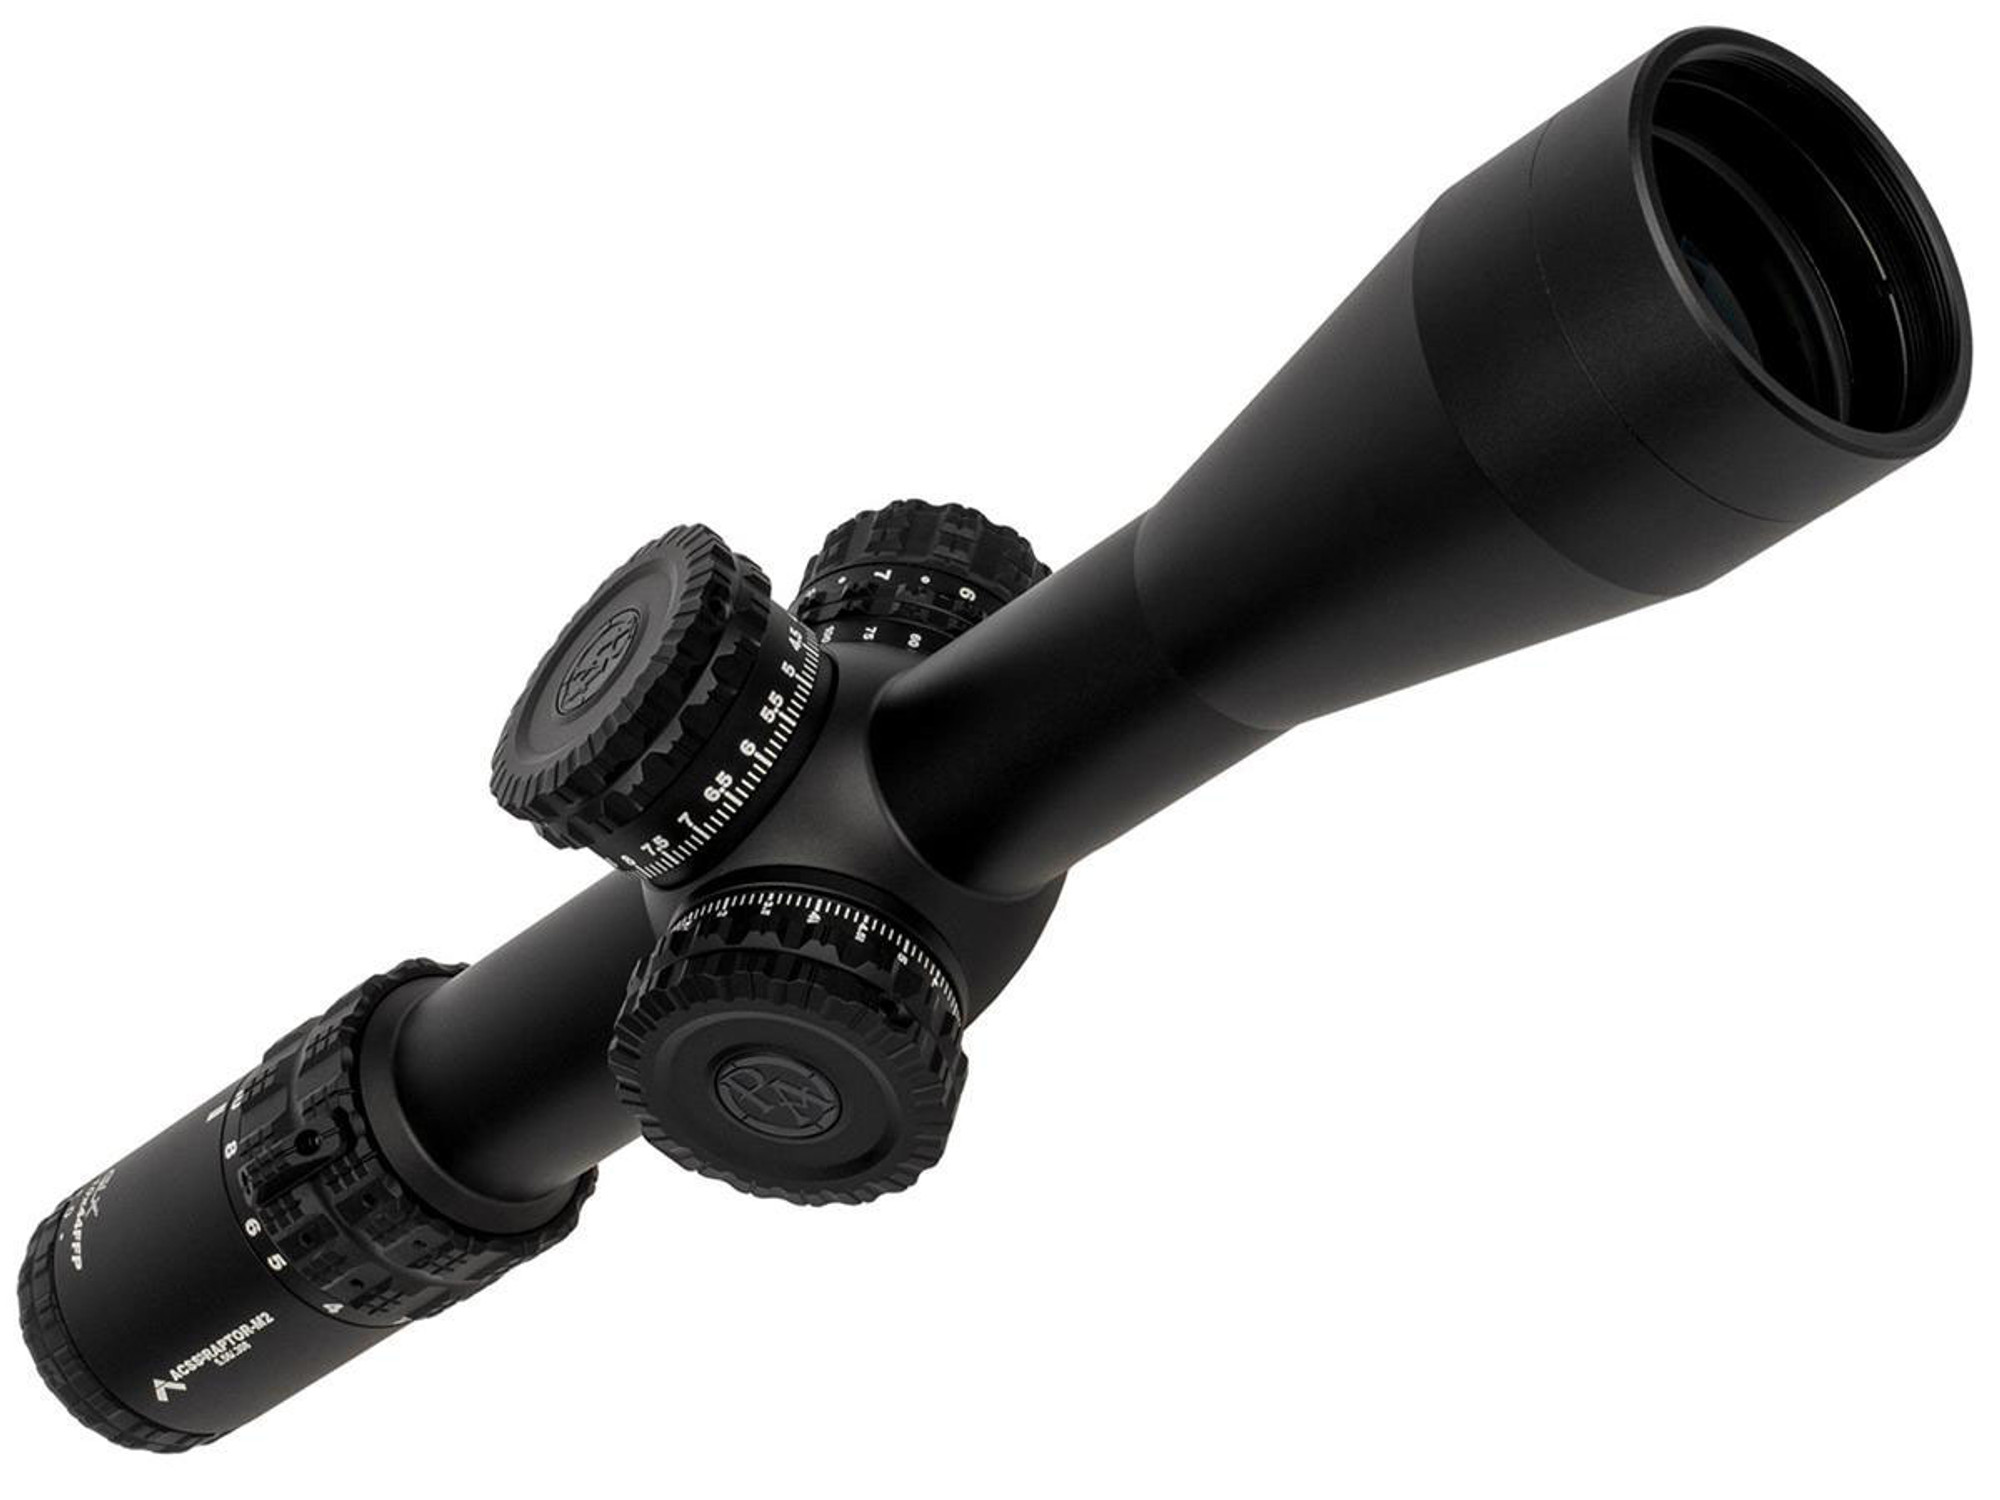 Primary Arms GLx4 Gold Series 2.5-10X44mm FFP Rifle Scope w/ Illuminated Reticle (Model: ACSS-RAPTOR-M2 5.56)